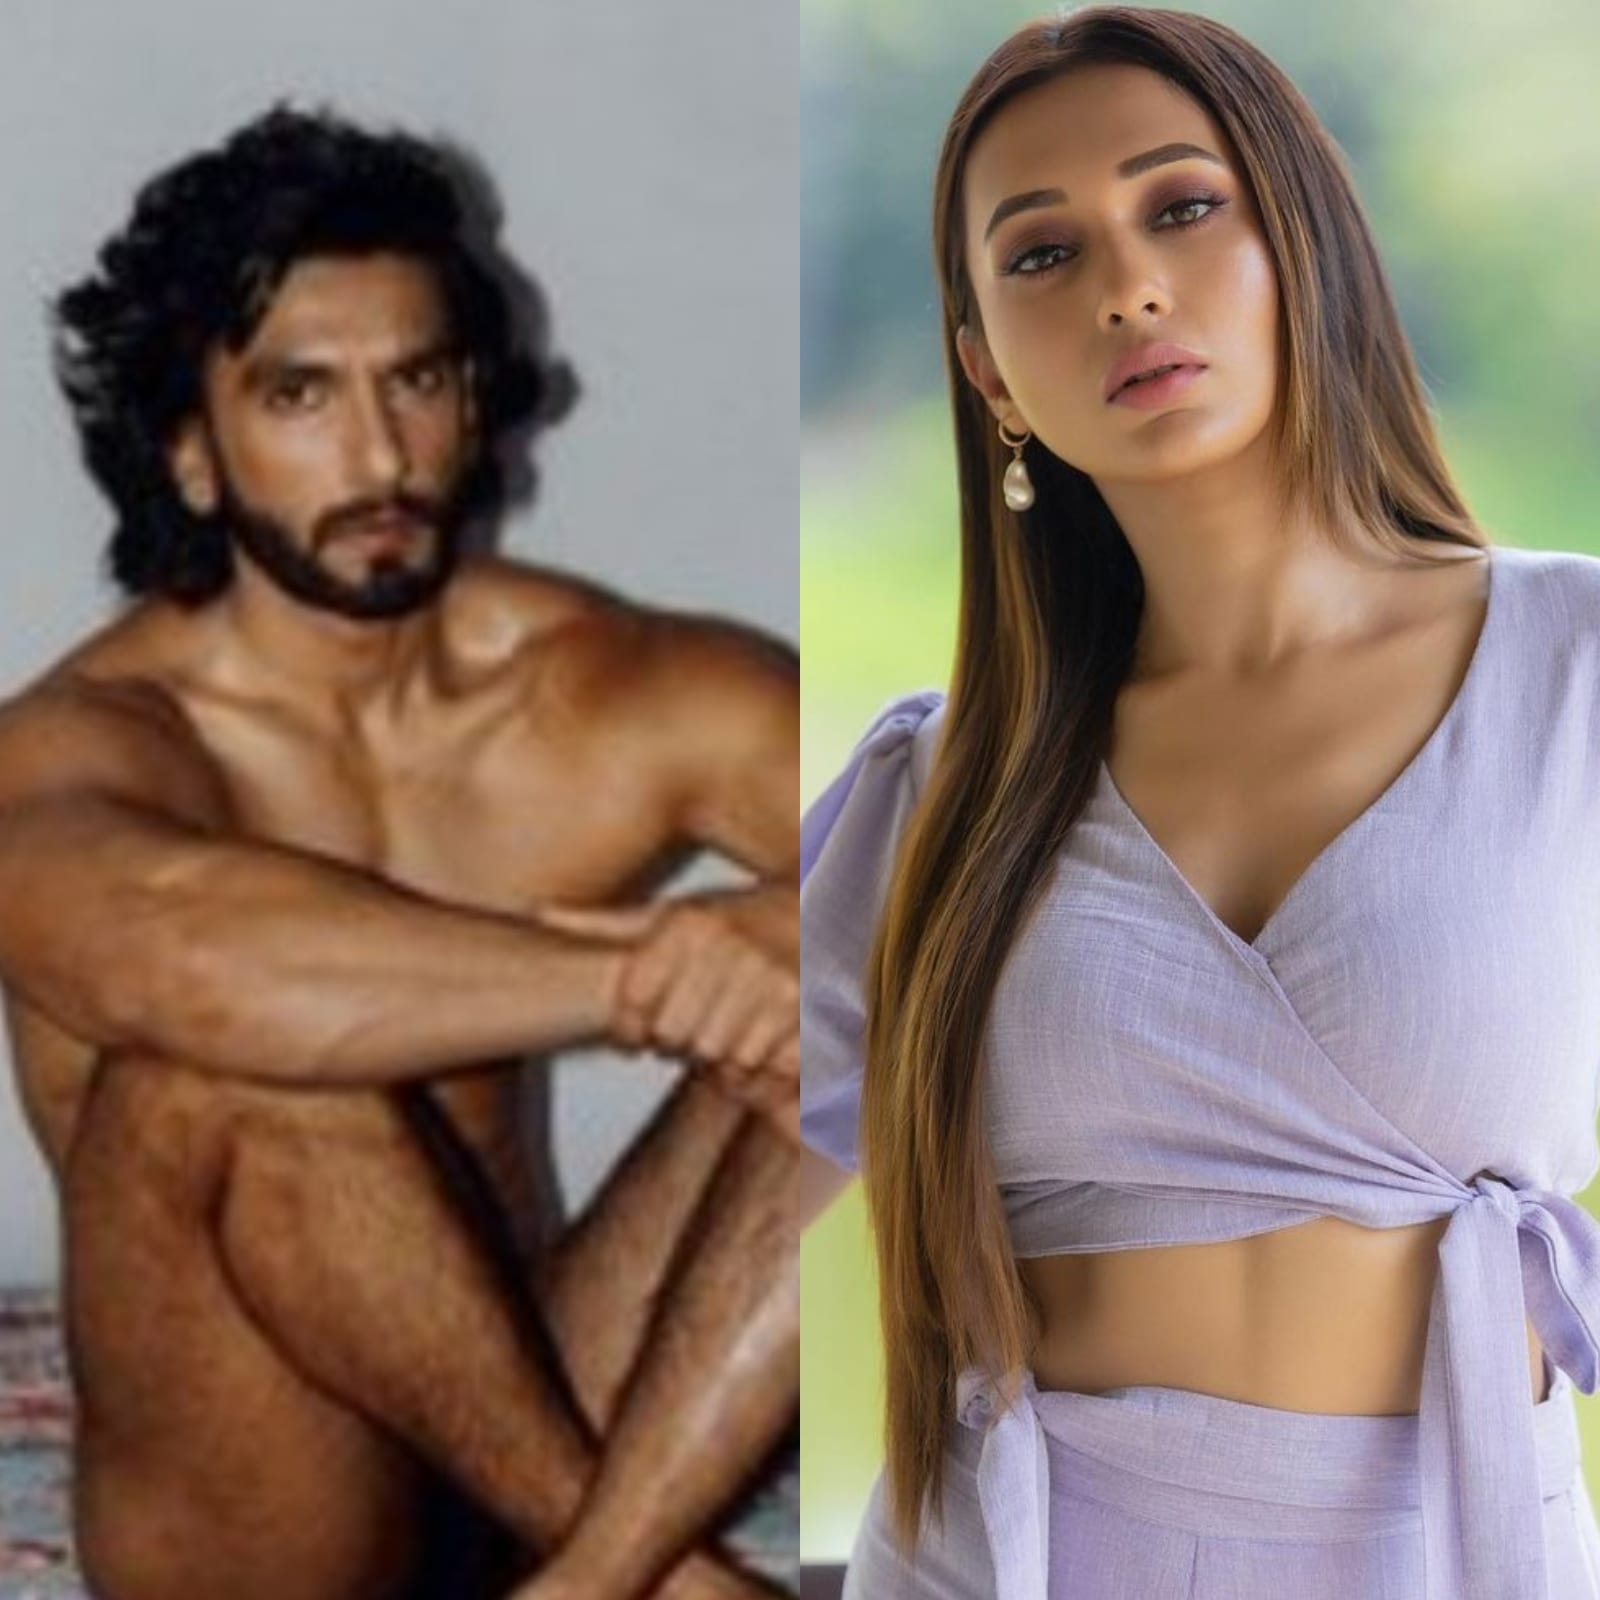 Mimi Chakraborty on Ranveer Singhs Nude Photoshoot Wonder If Appreciation Would Have Been The Same...